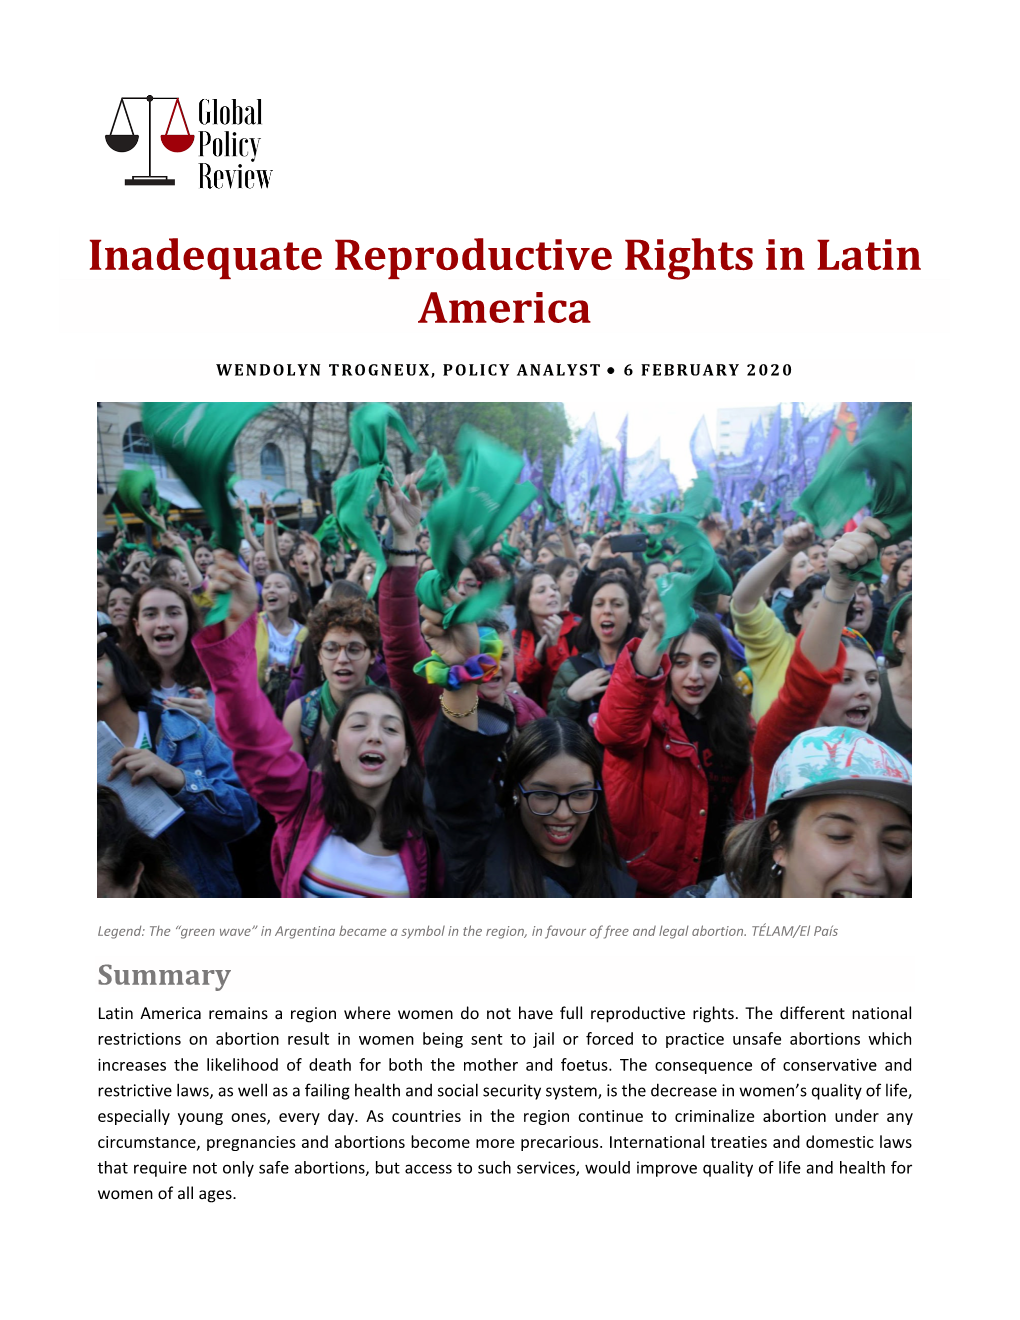 Inadequate Reproductive Rights in Latin America